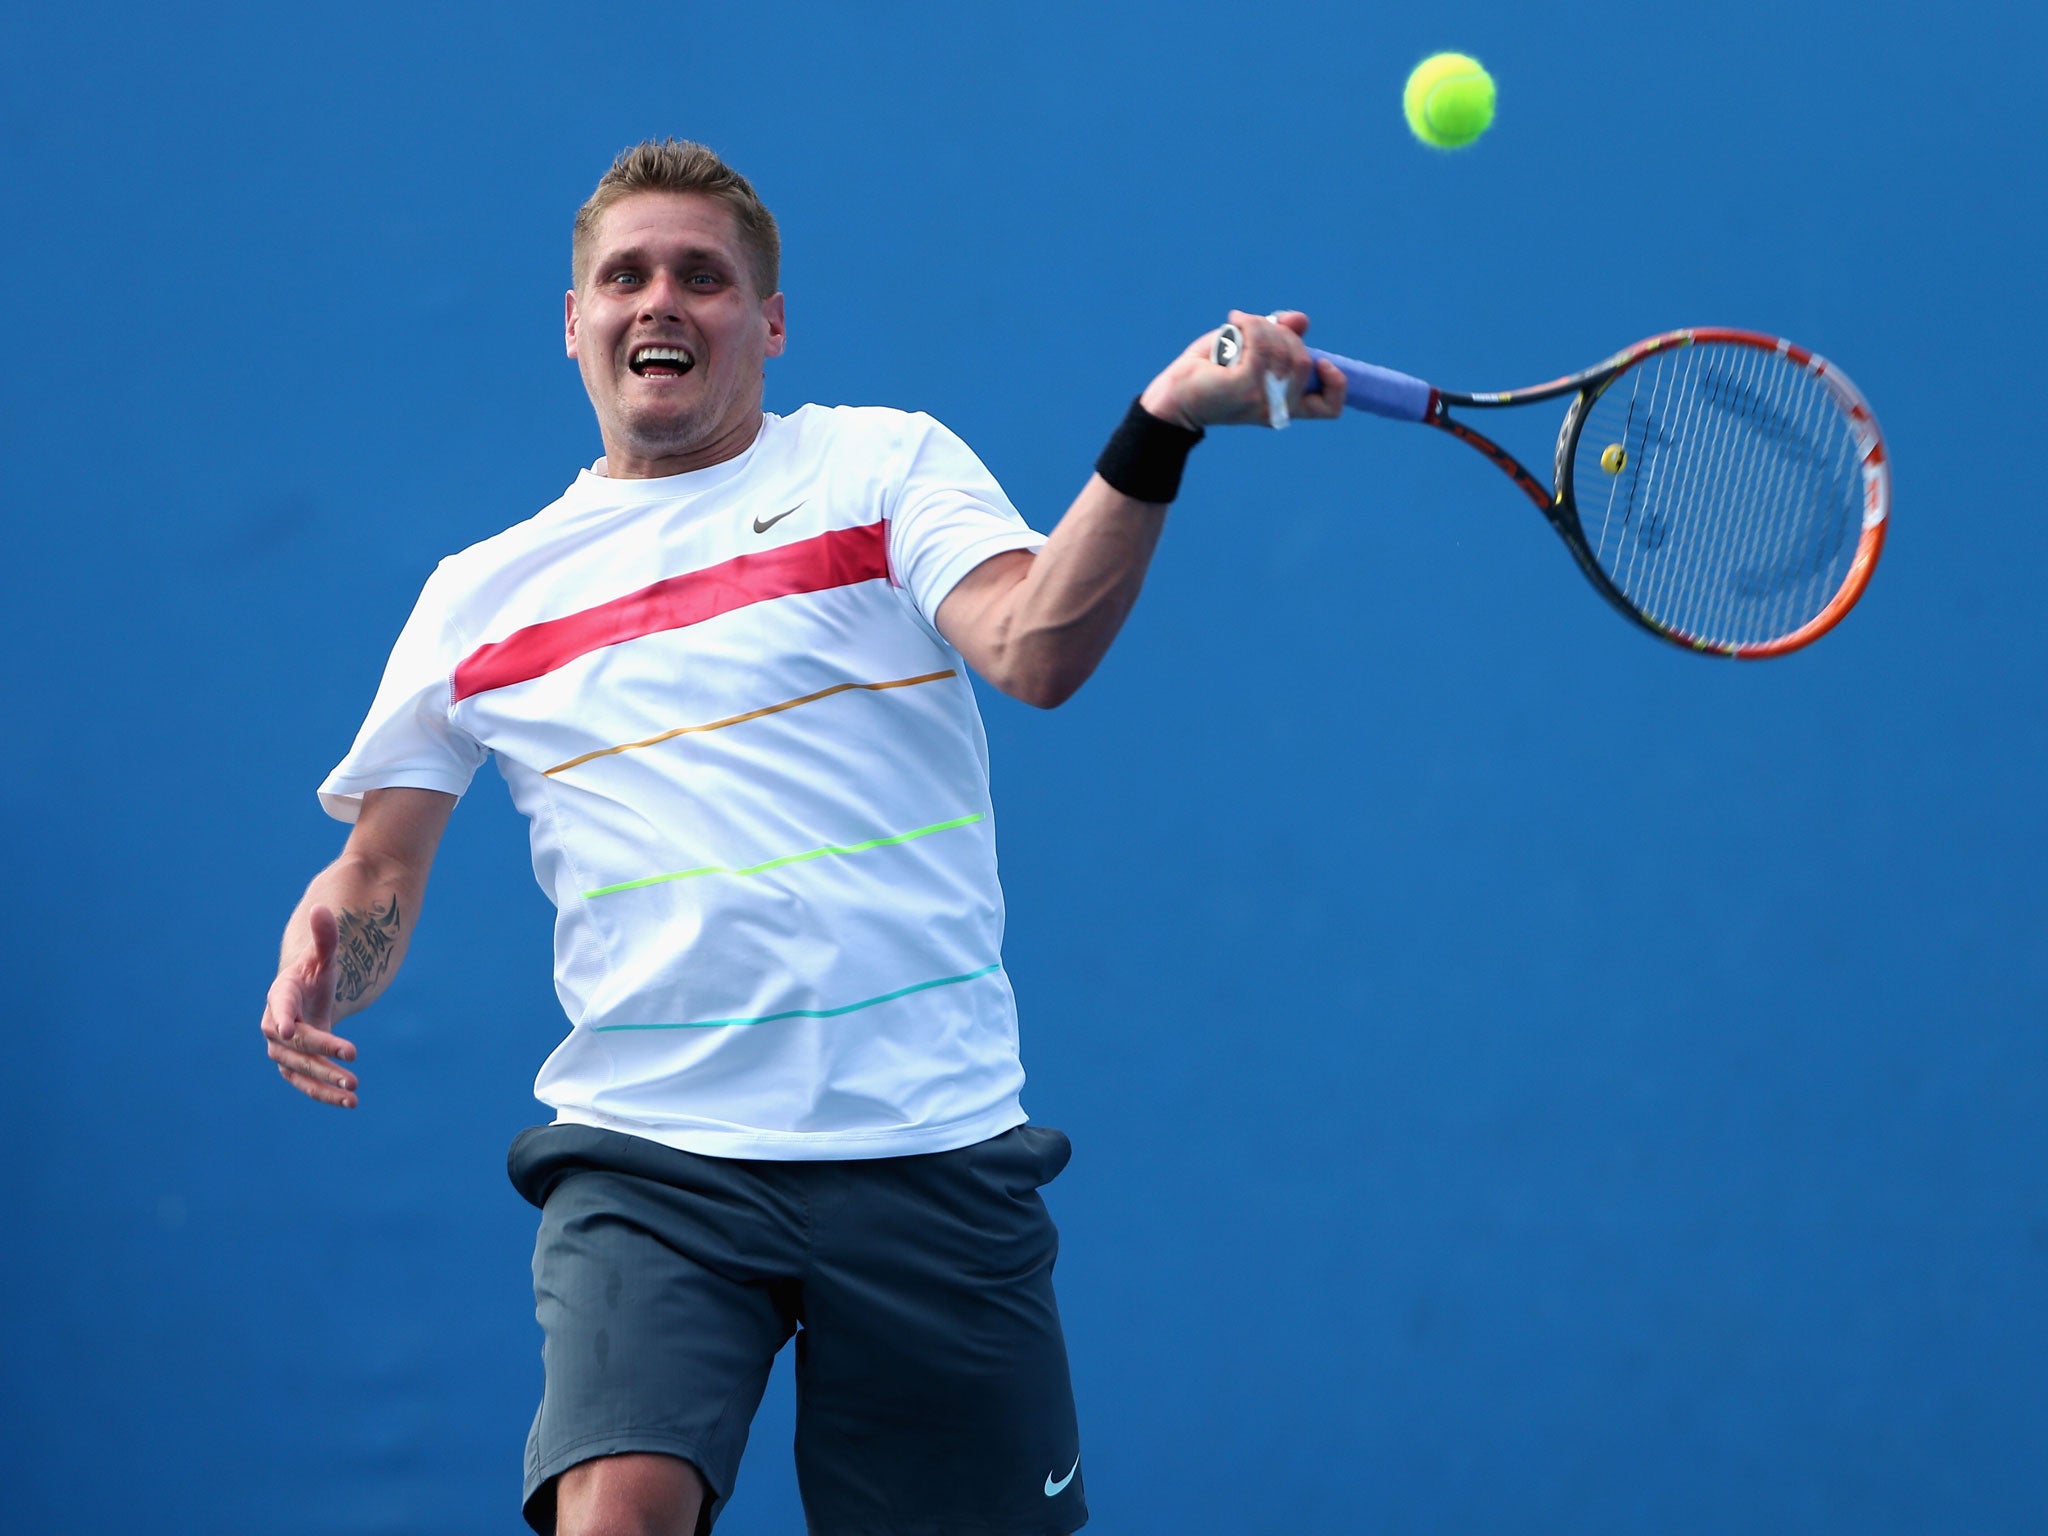 Vincent Millot is hoping to cause a major upset when he takes on Andy Murray in the second round of the Australian Open